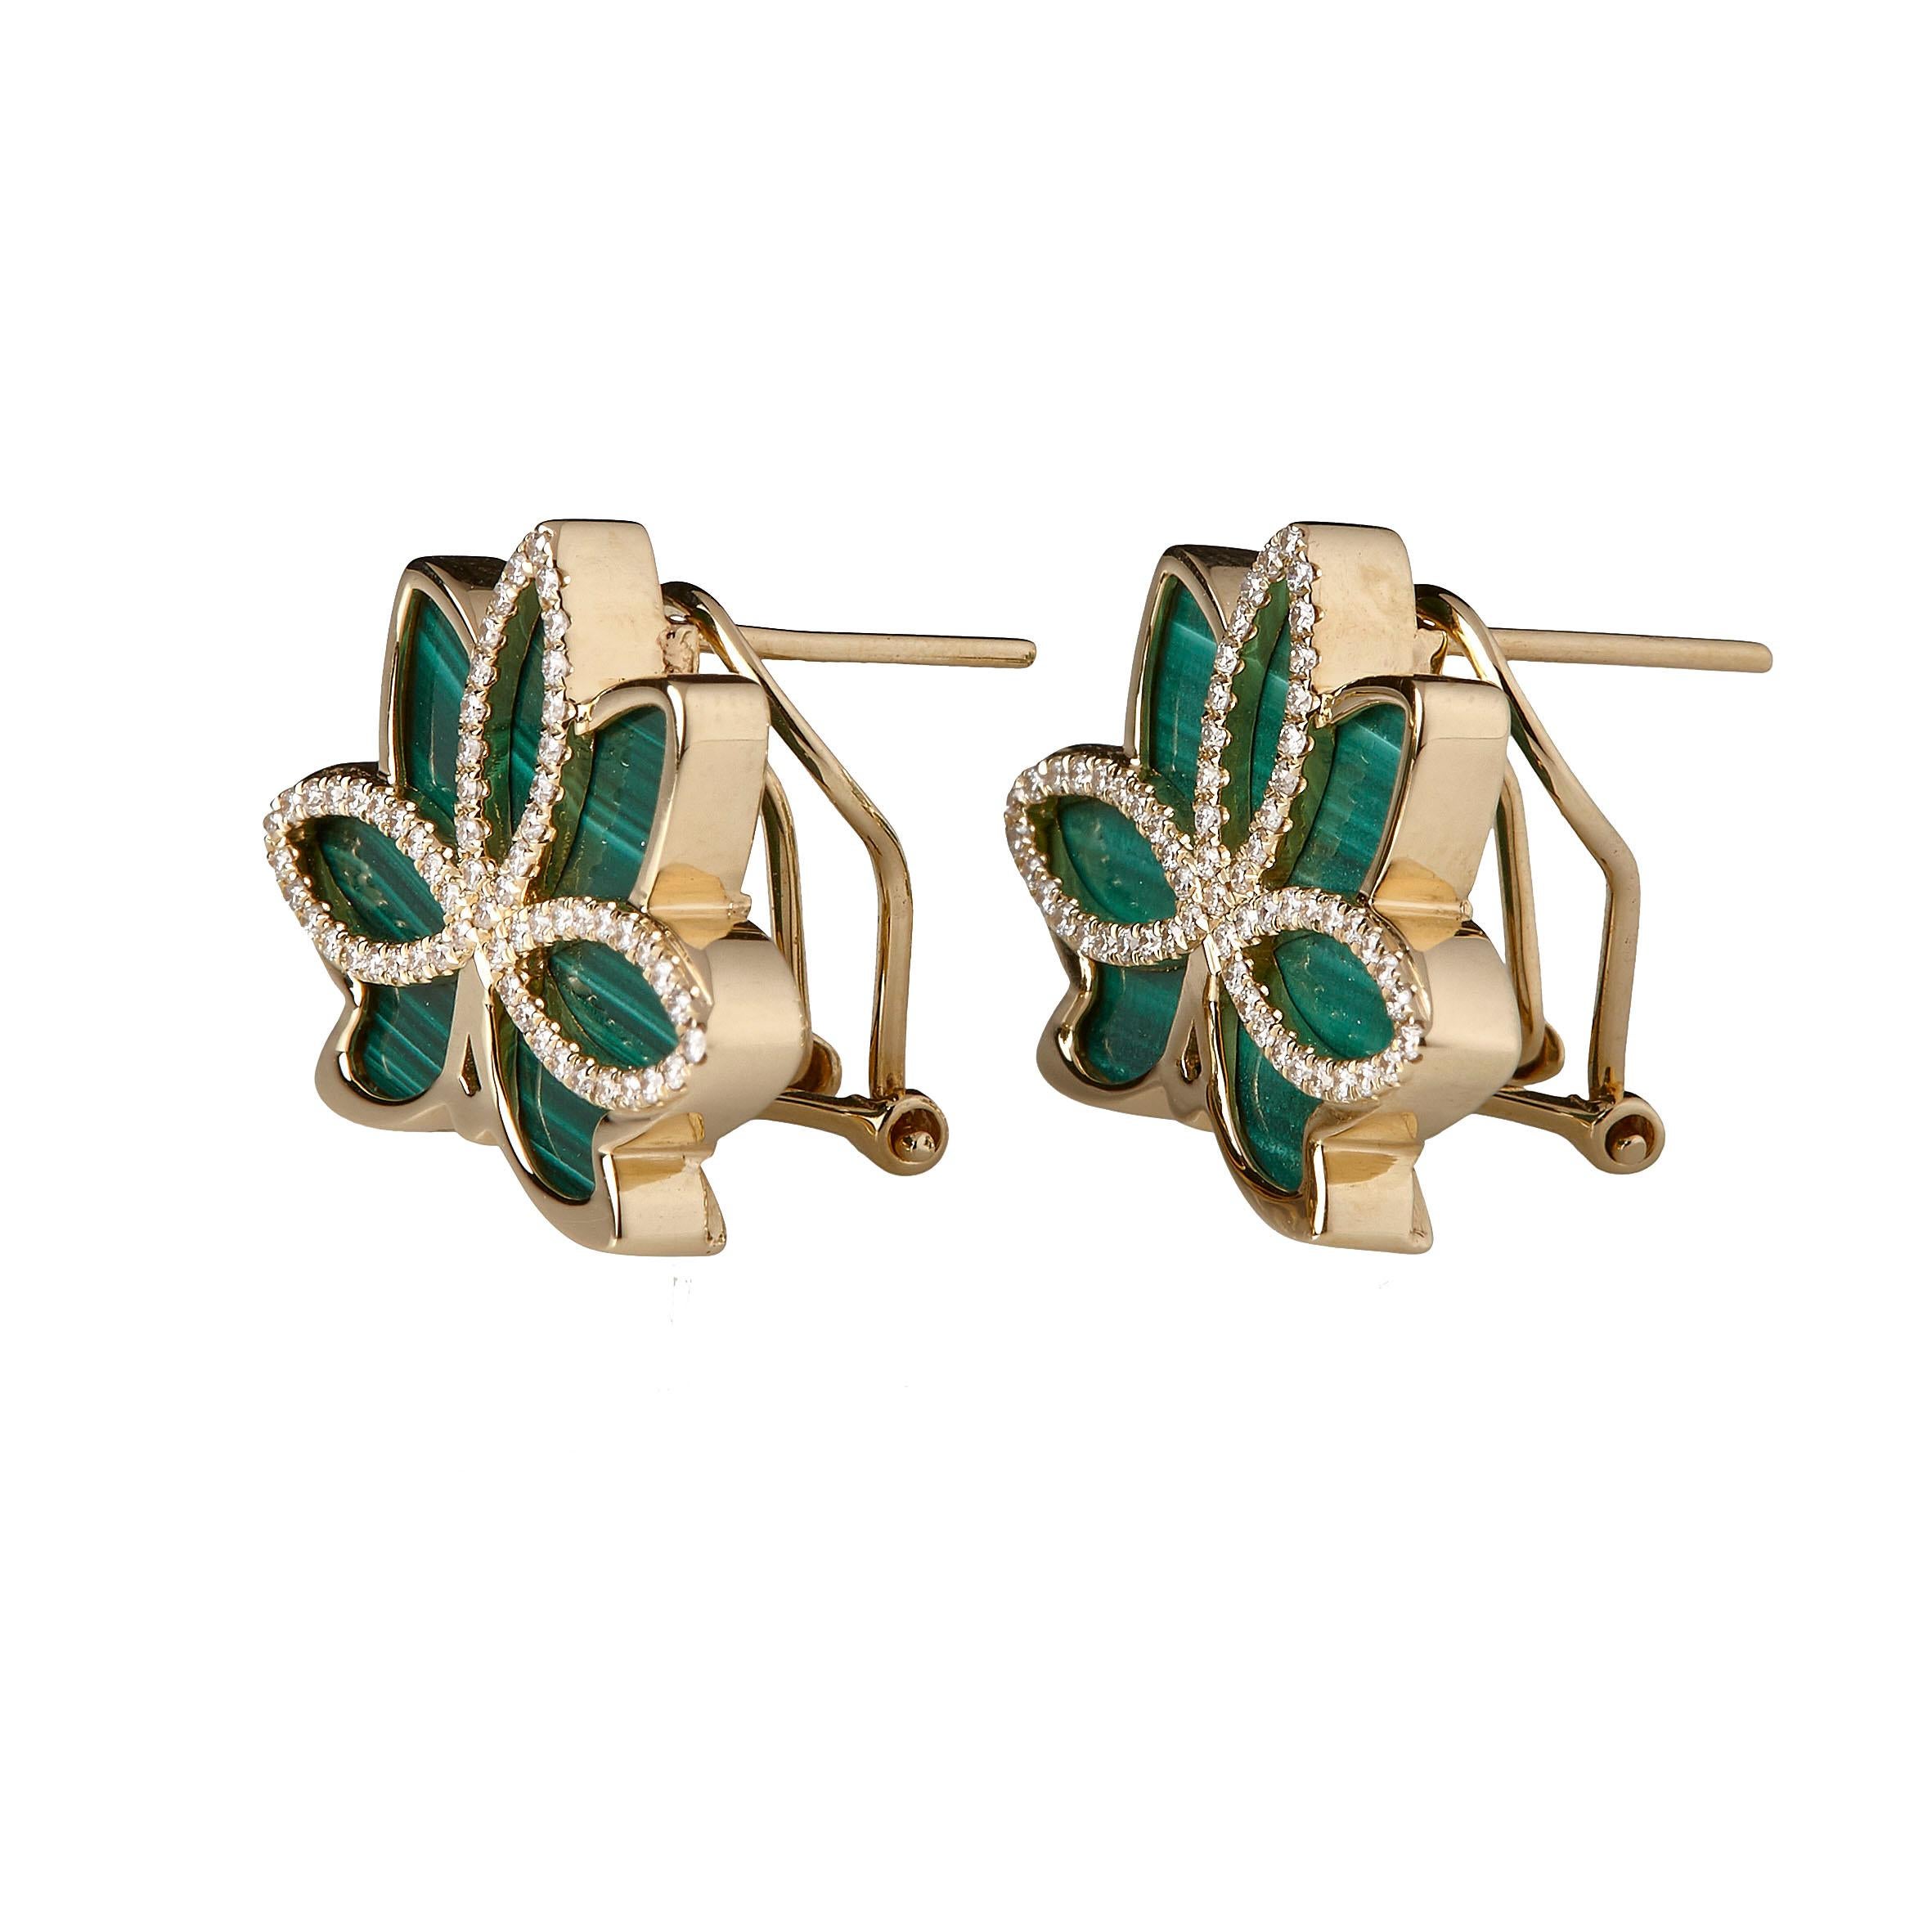 Made with genuine Nelumbo Malachite that emits a gentle glow, the earrings are elegant and eye-catching. Slightly larger than the mini ones with a clip on the back, these earring still manage to provide balance. These delicate studs remain